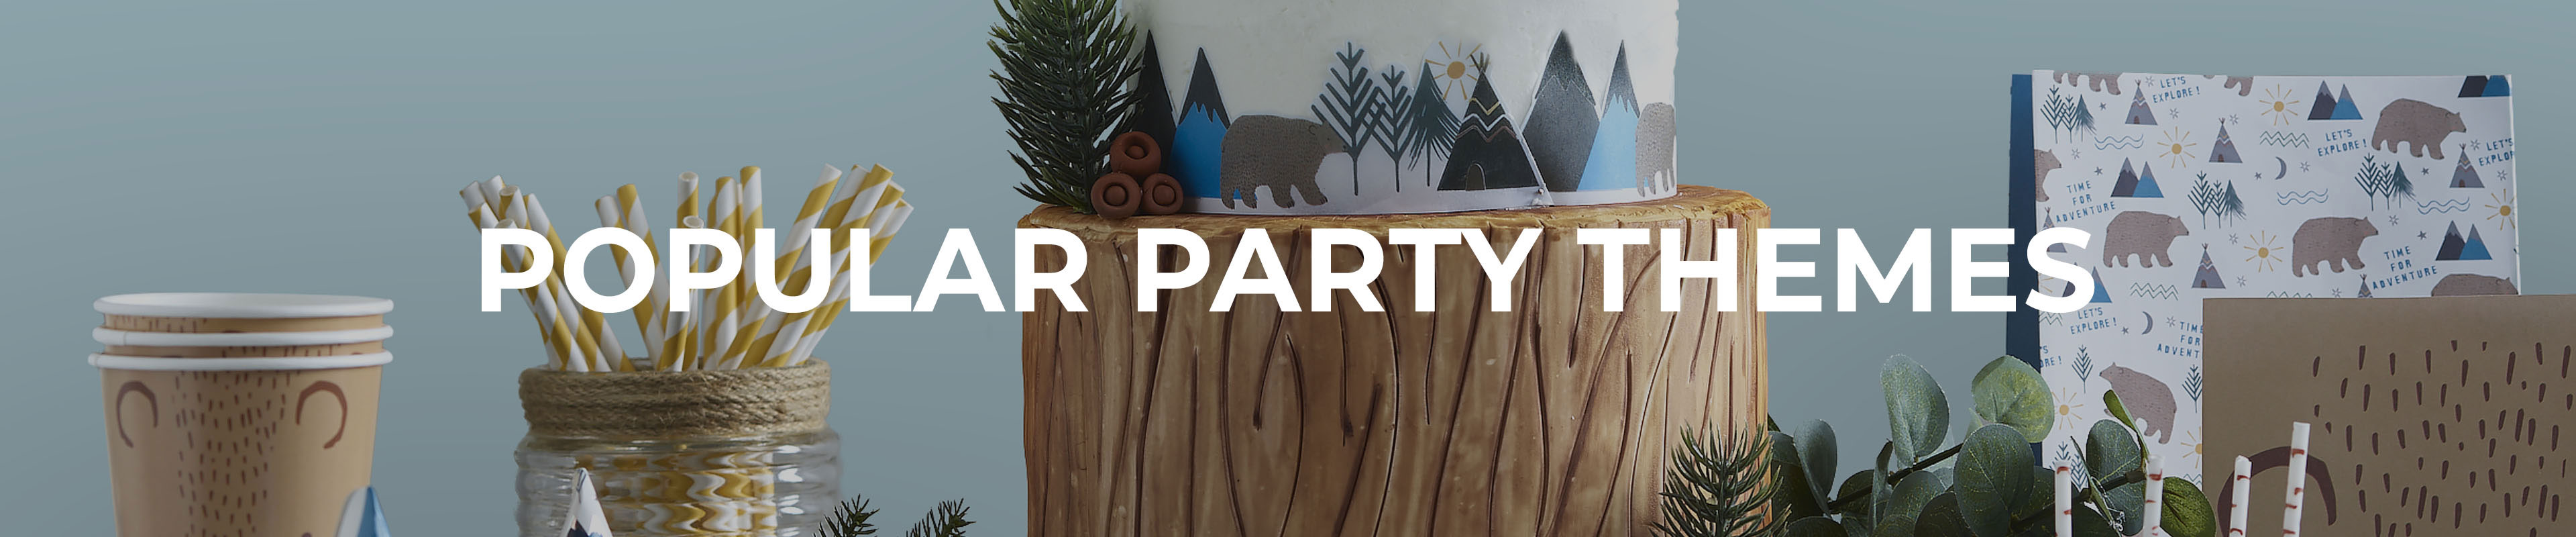 Shop Our Popular Party Themes Range